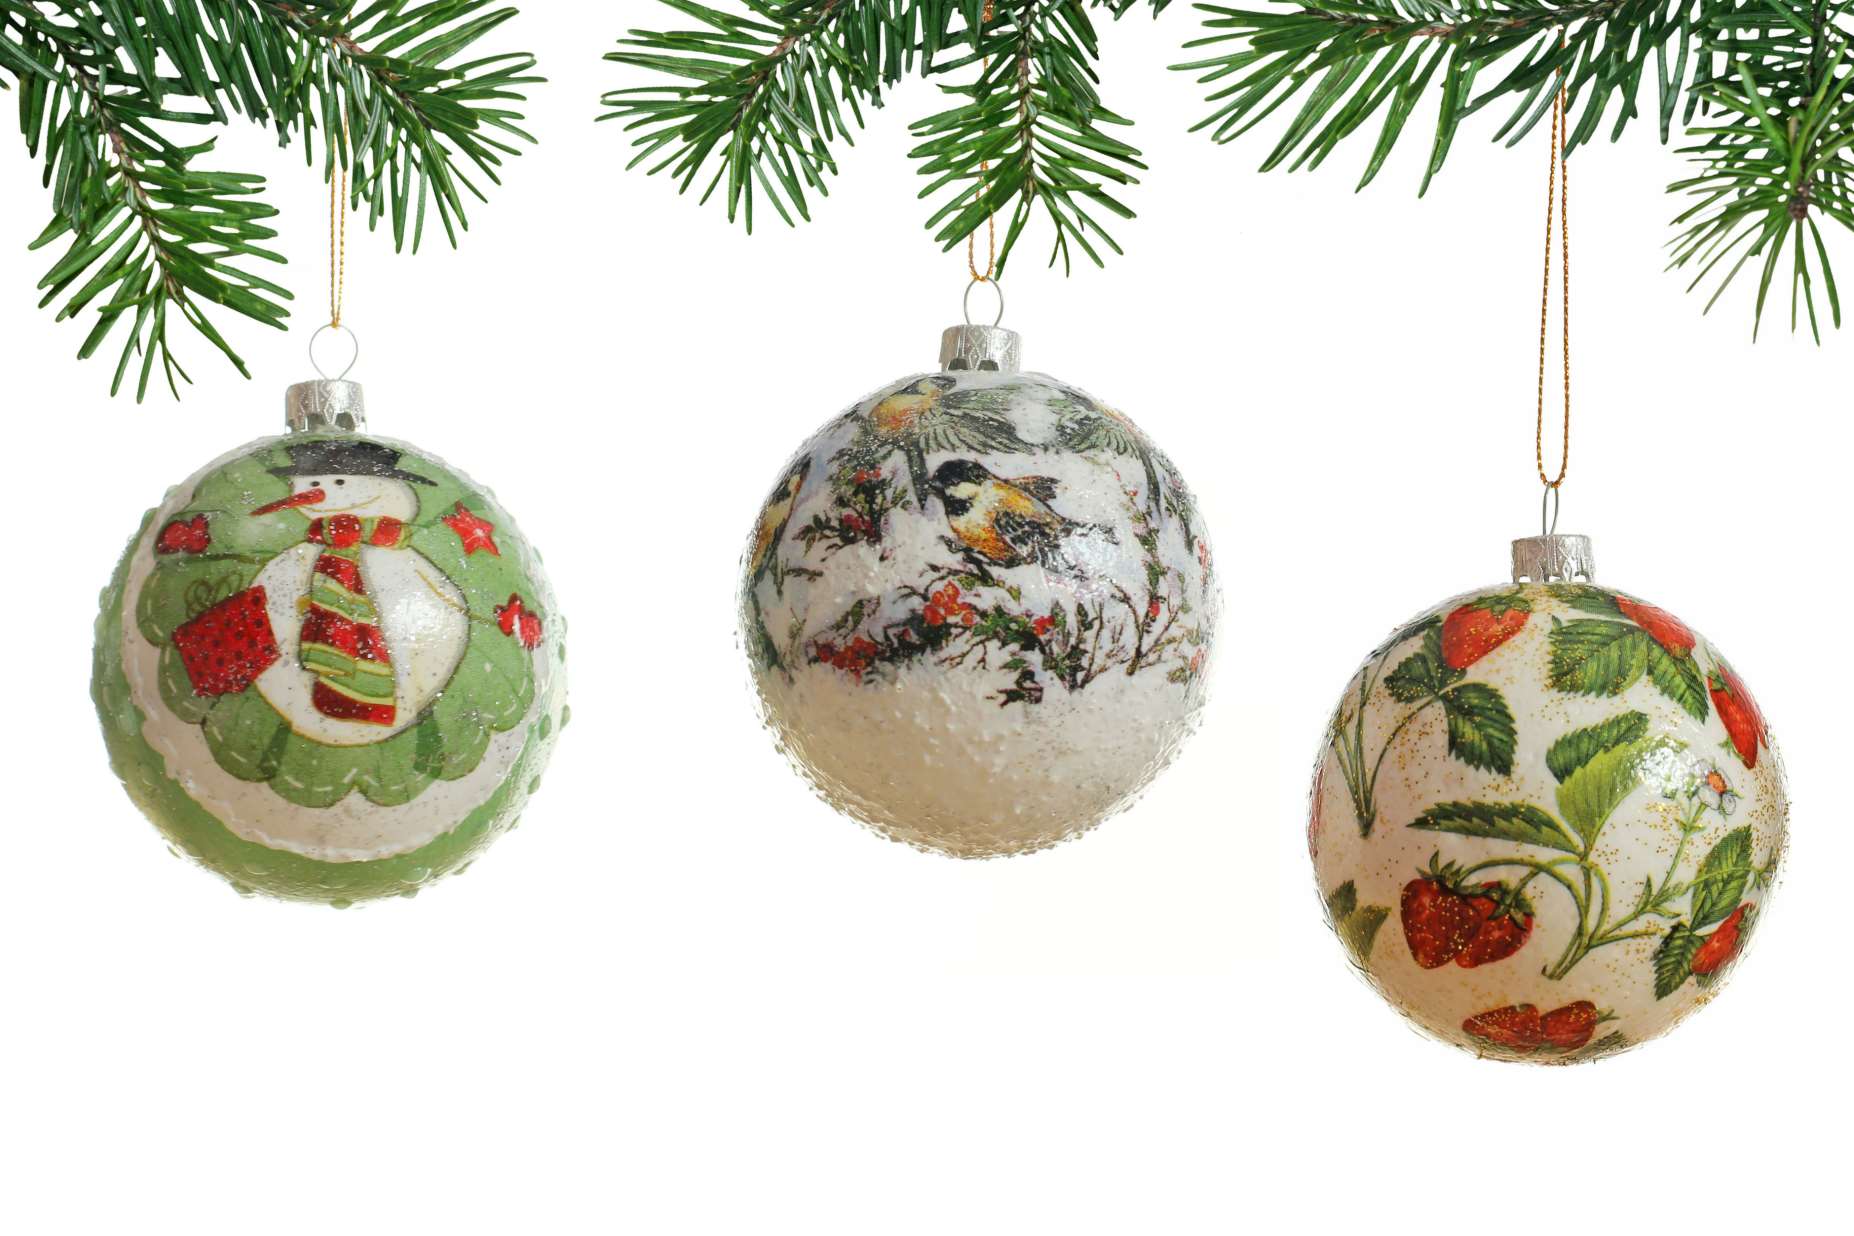 Individually designed Christmas baubles